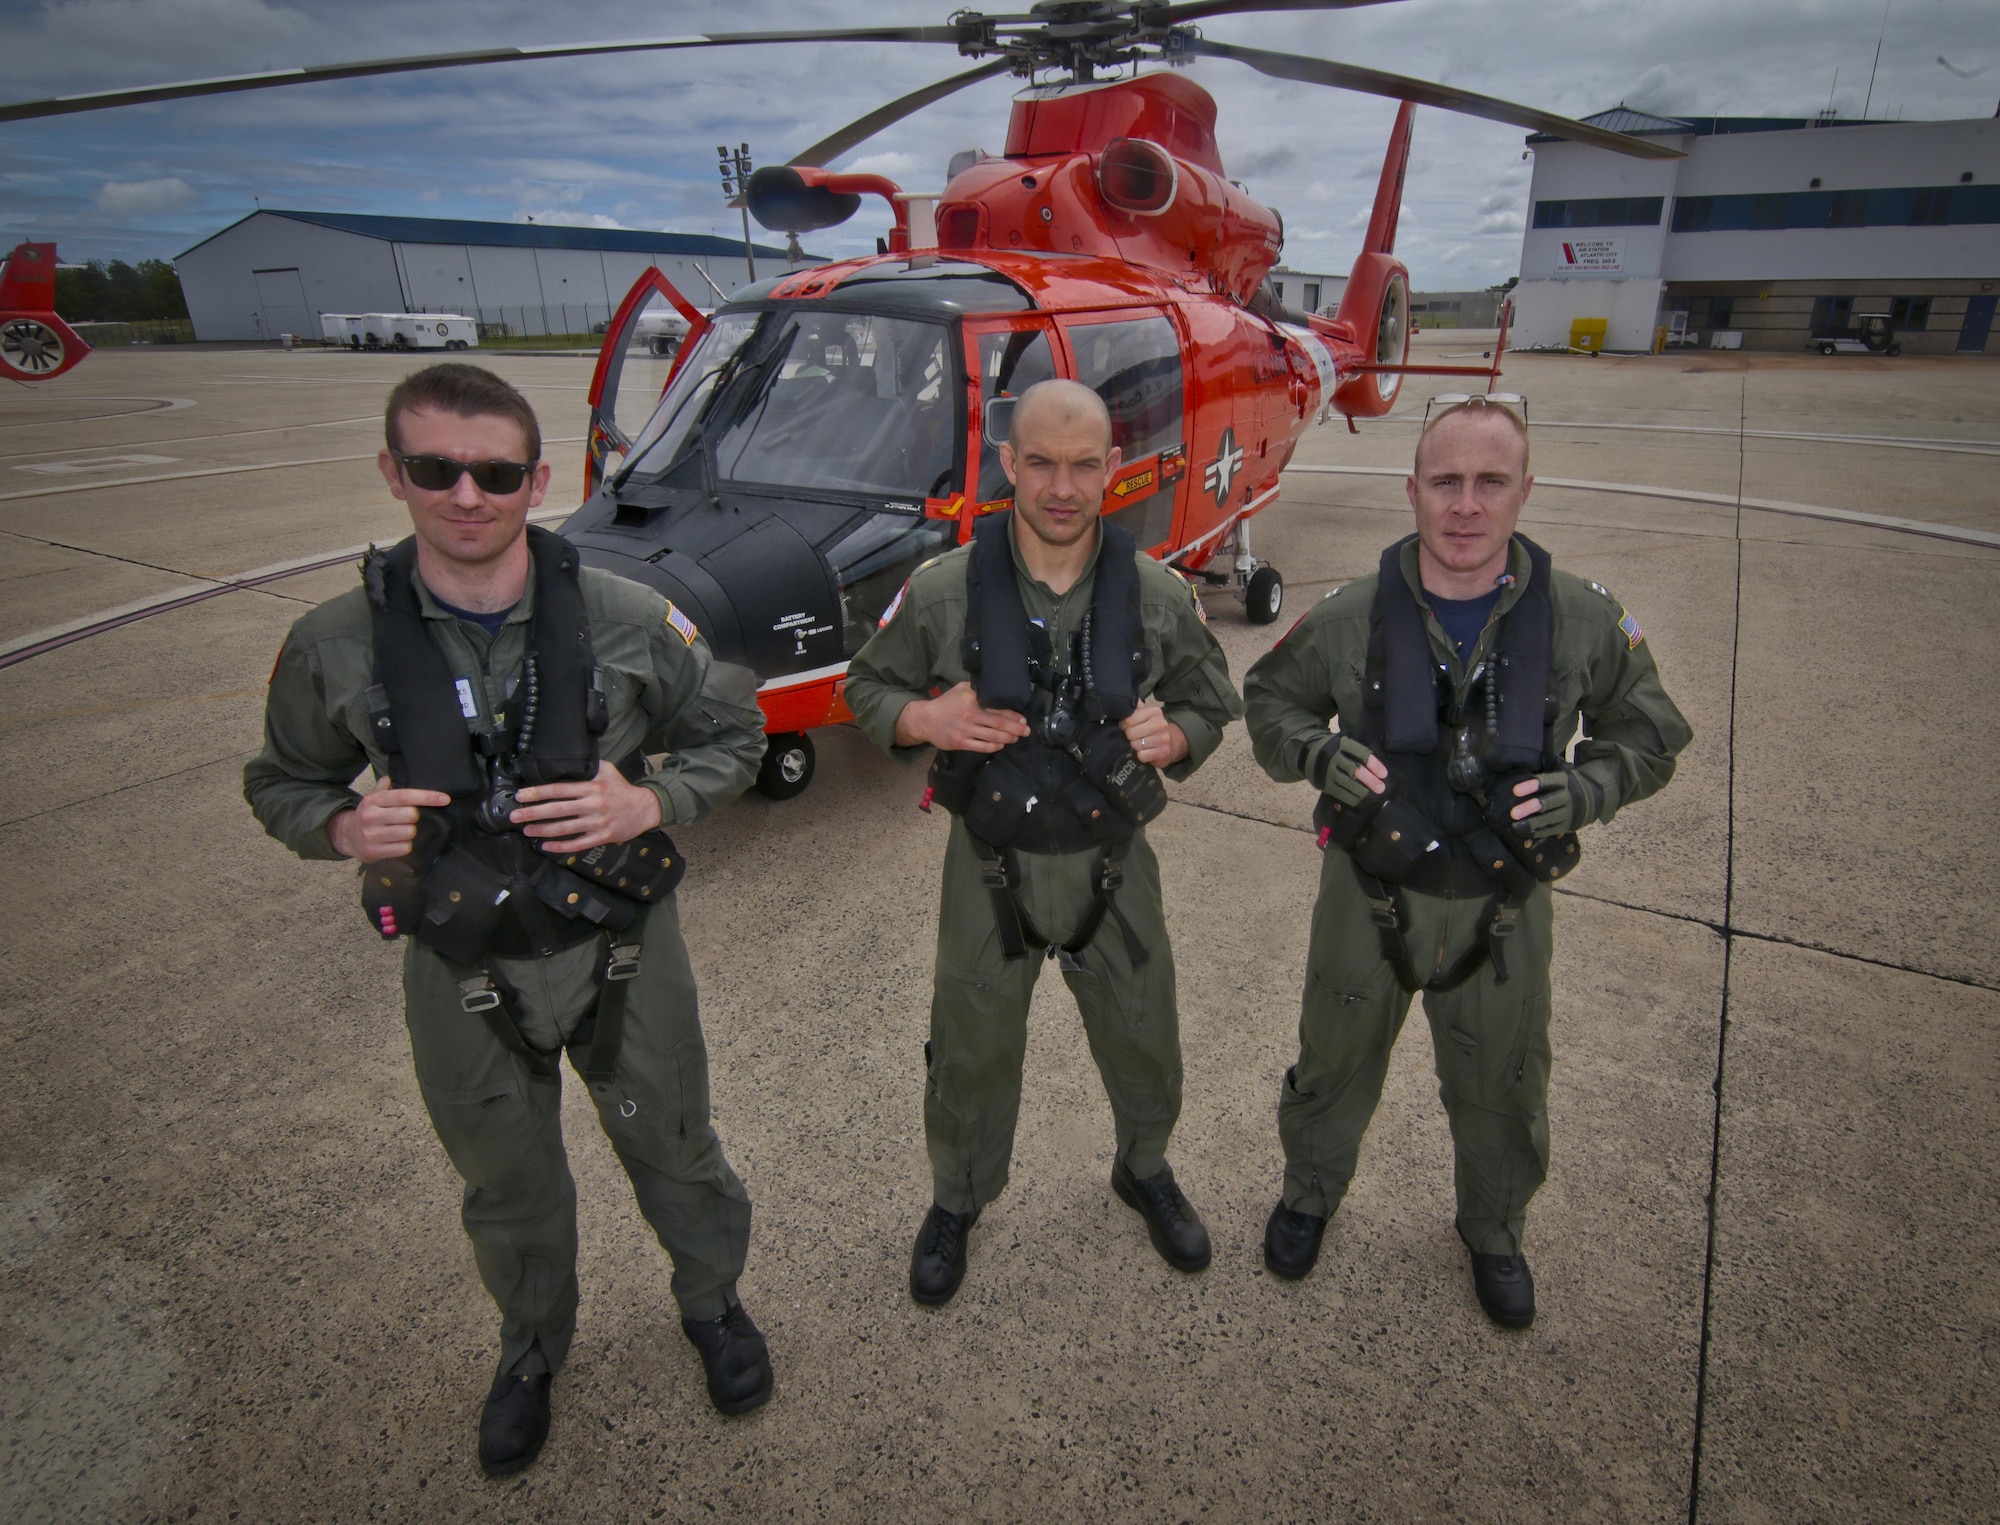 A U.S. Coast Guard HH-65C Dolphin helicopter crew from Coast Guard Air Station Atlantic City stand for a portrait before a mission during a three-day Aeropsace Control Alert CrossTell live-fly training exercise at Atlantic City International Airport, N.J., May 24, 2017. Representatives from the Air National Guard fighter wings, Civil Air Patrol, and U.S. Coast Guard rotary-wing air intercept units will conduct daily sorties from May 23-25 to hone their skills with tactical-level air-intercept procedures. (U.S. Air National Guard photo by Master Sgt. Matt Hecht/Released)